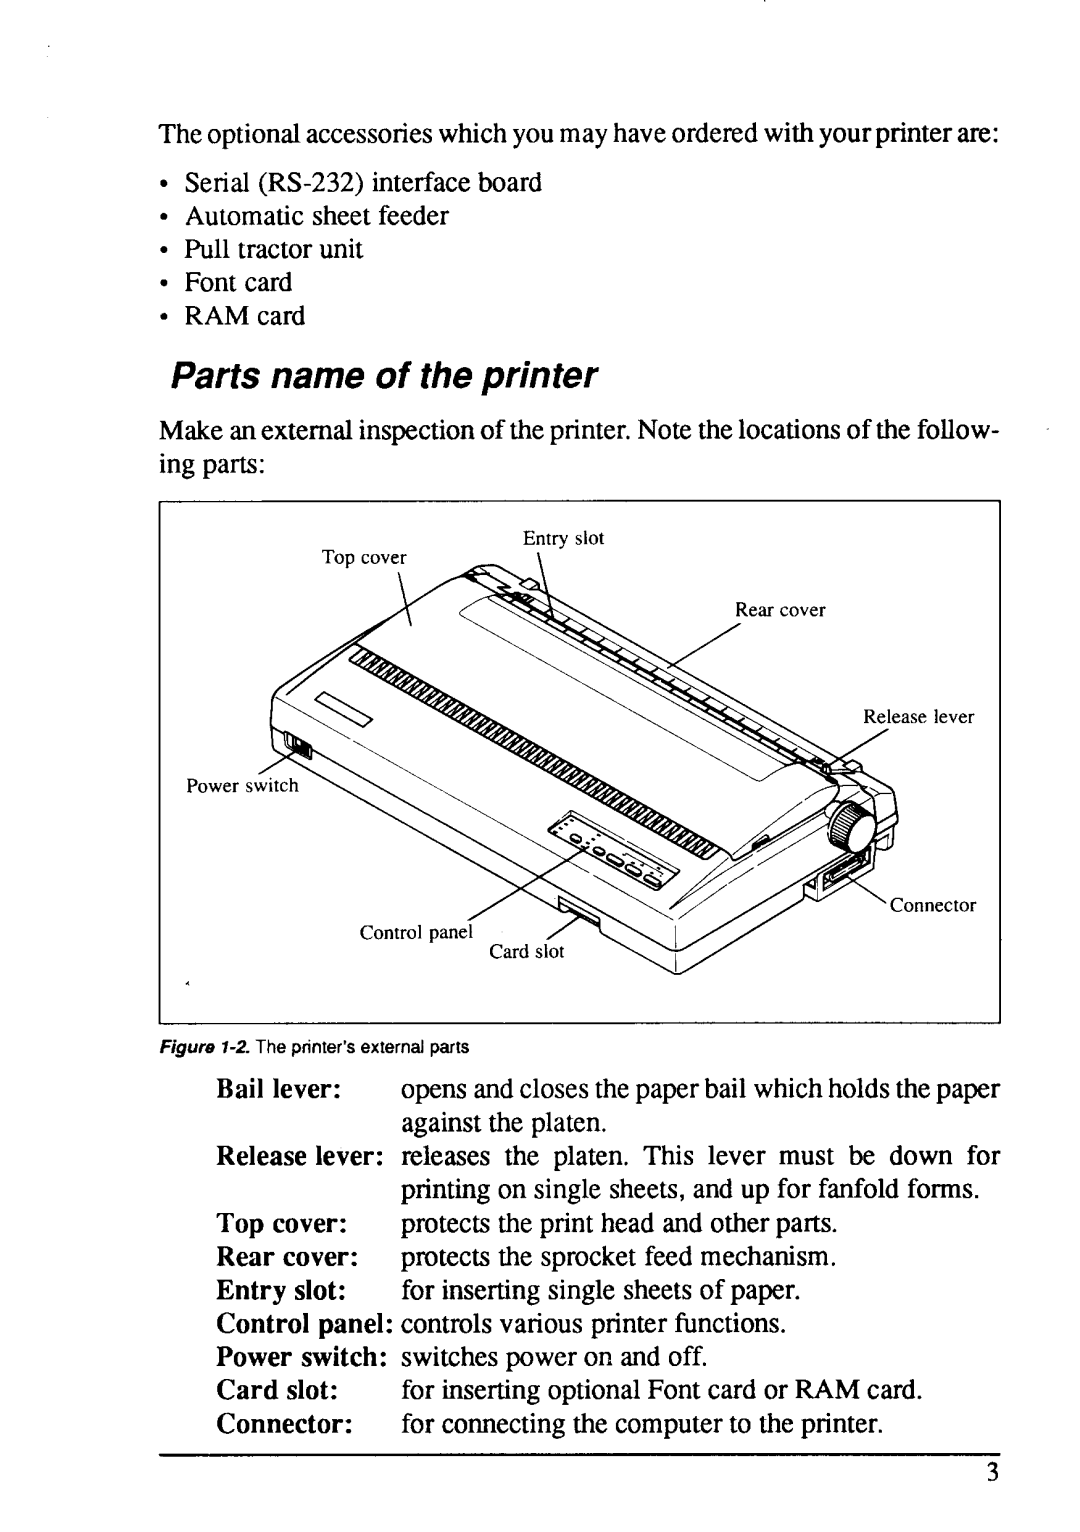 Star Micronics LC24-15 user manual Parts name of the printer 